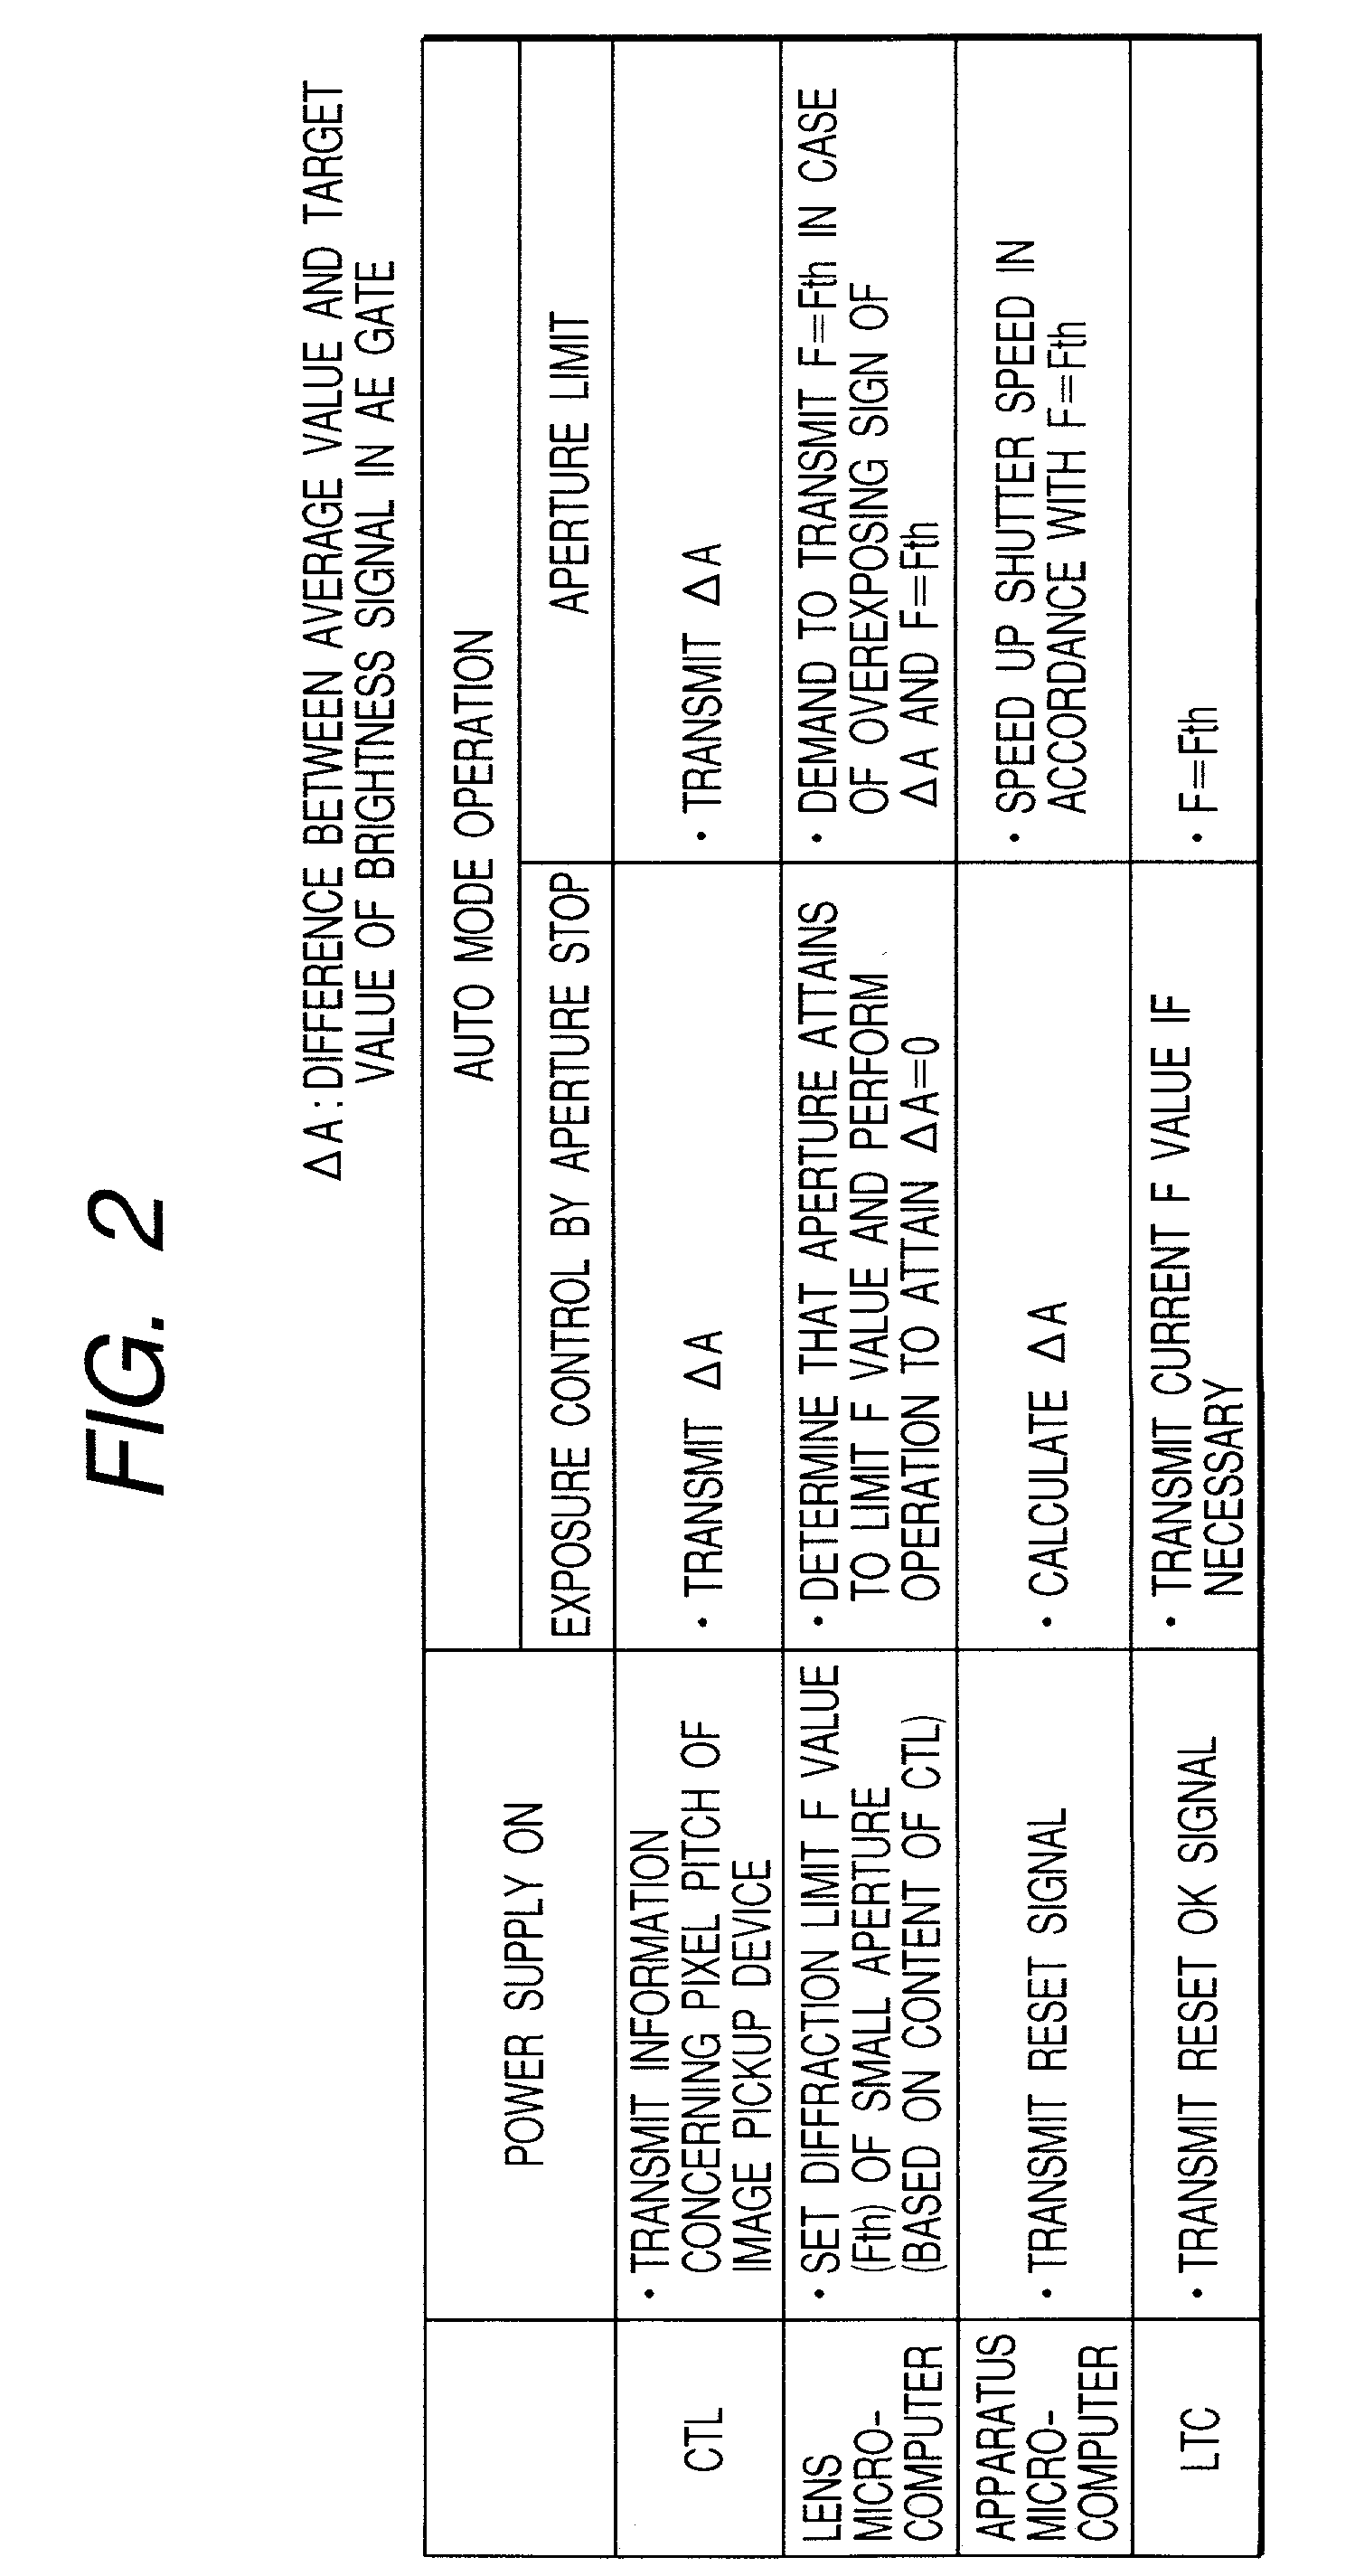 Optical apparatus including image pick-up device and interchangeable lens with controller for controlling change of aperture